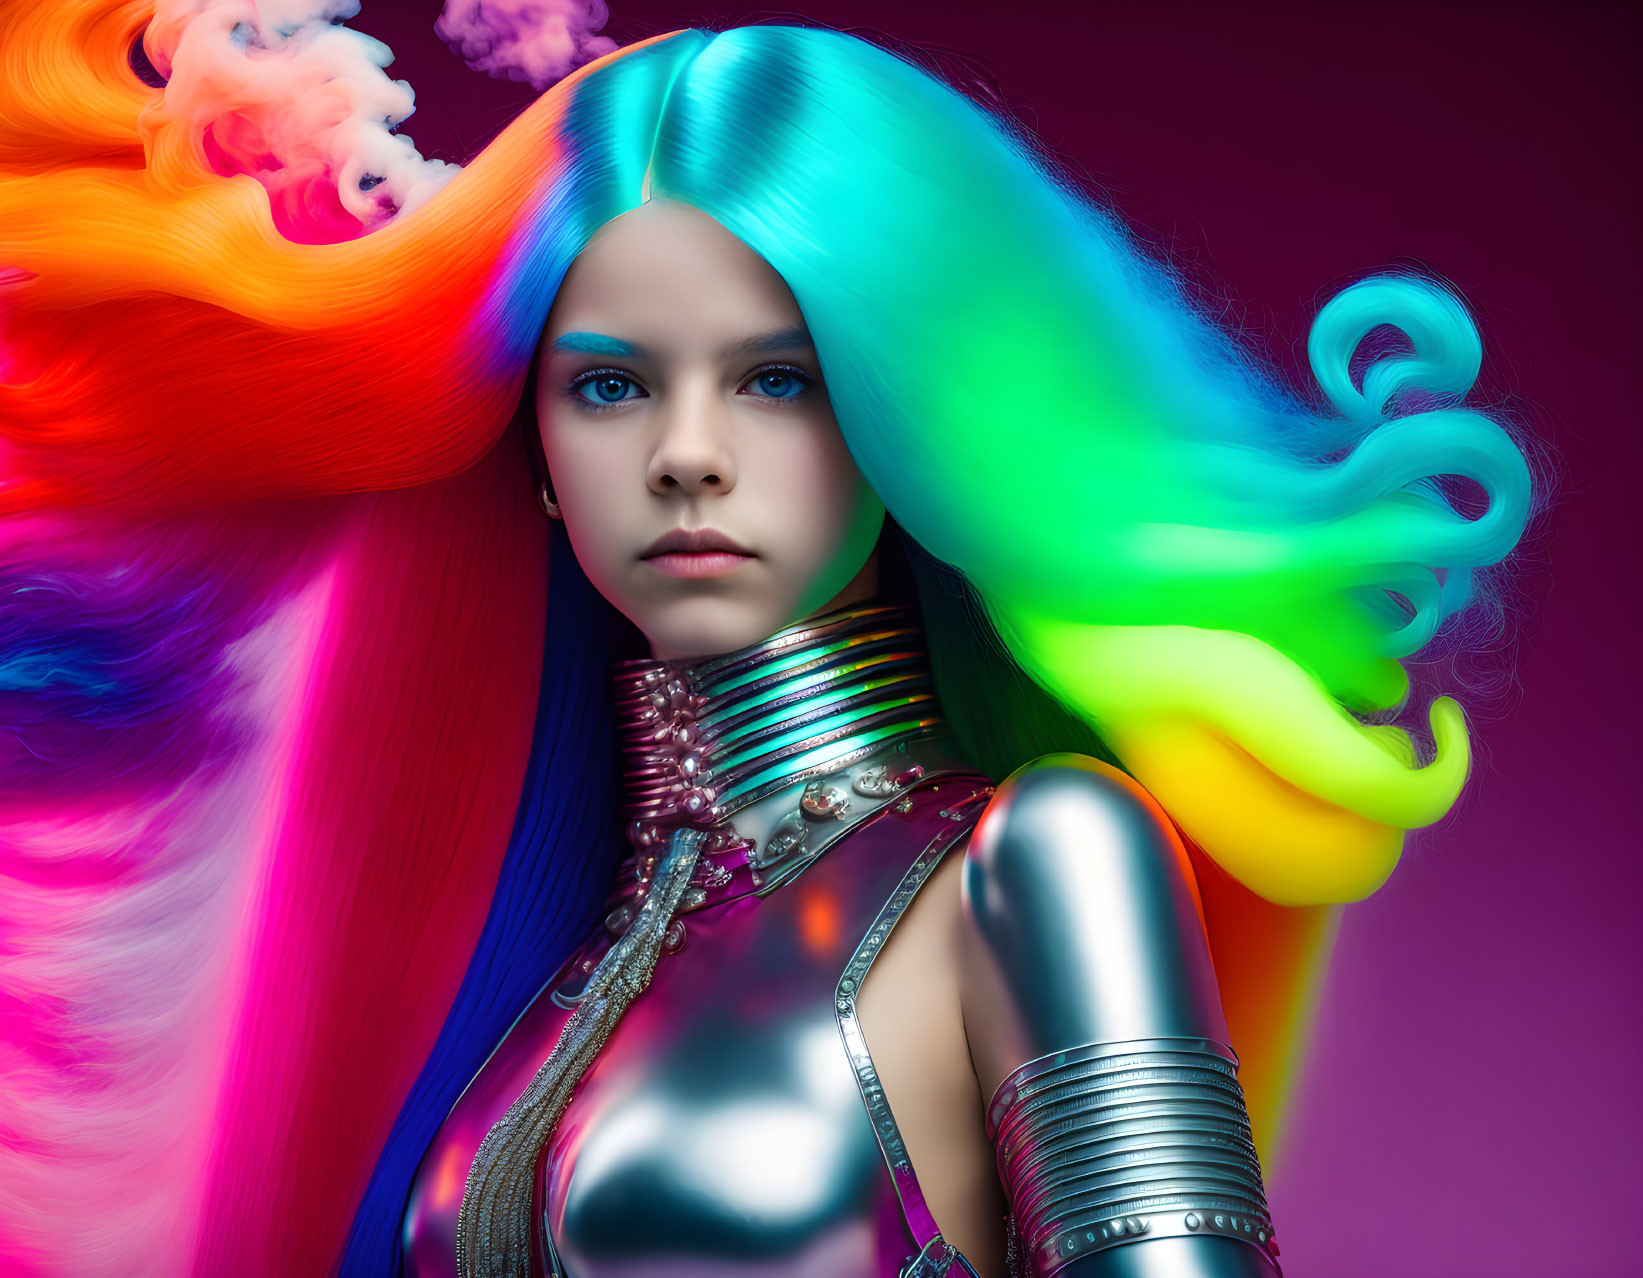 Vibrant multicolored hair and metallic fashion against colorful backdrop